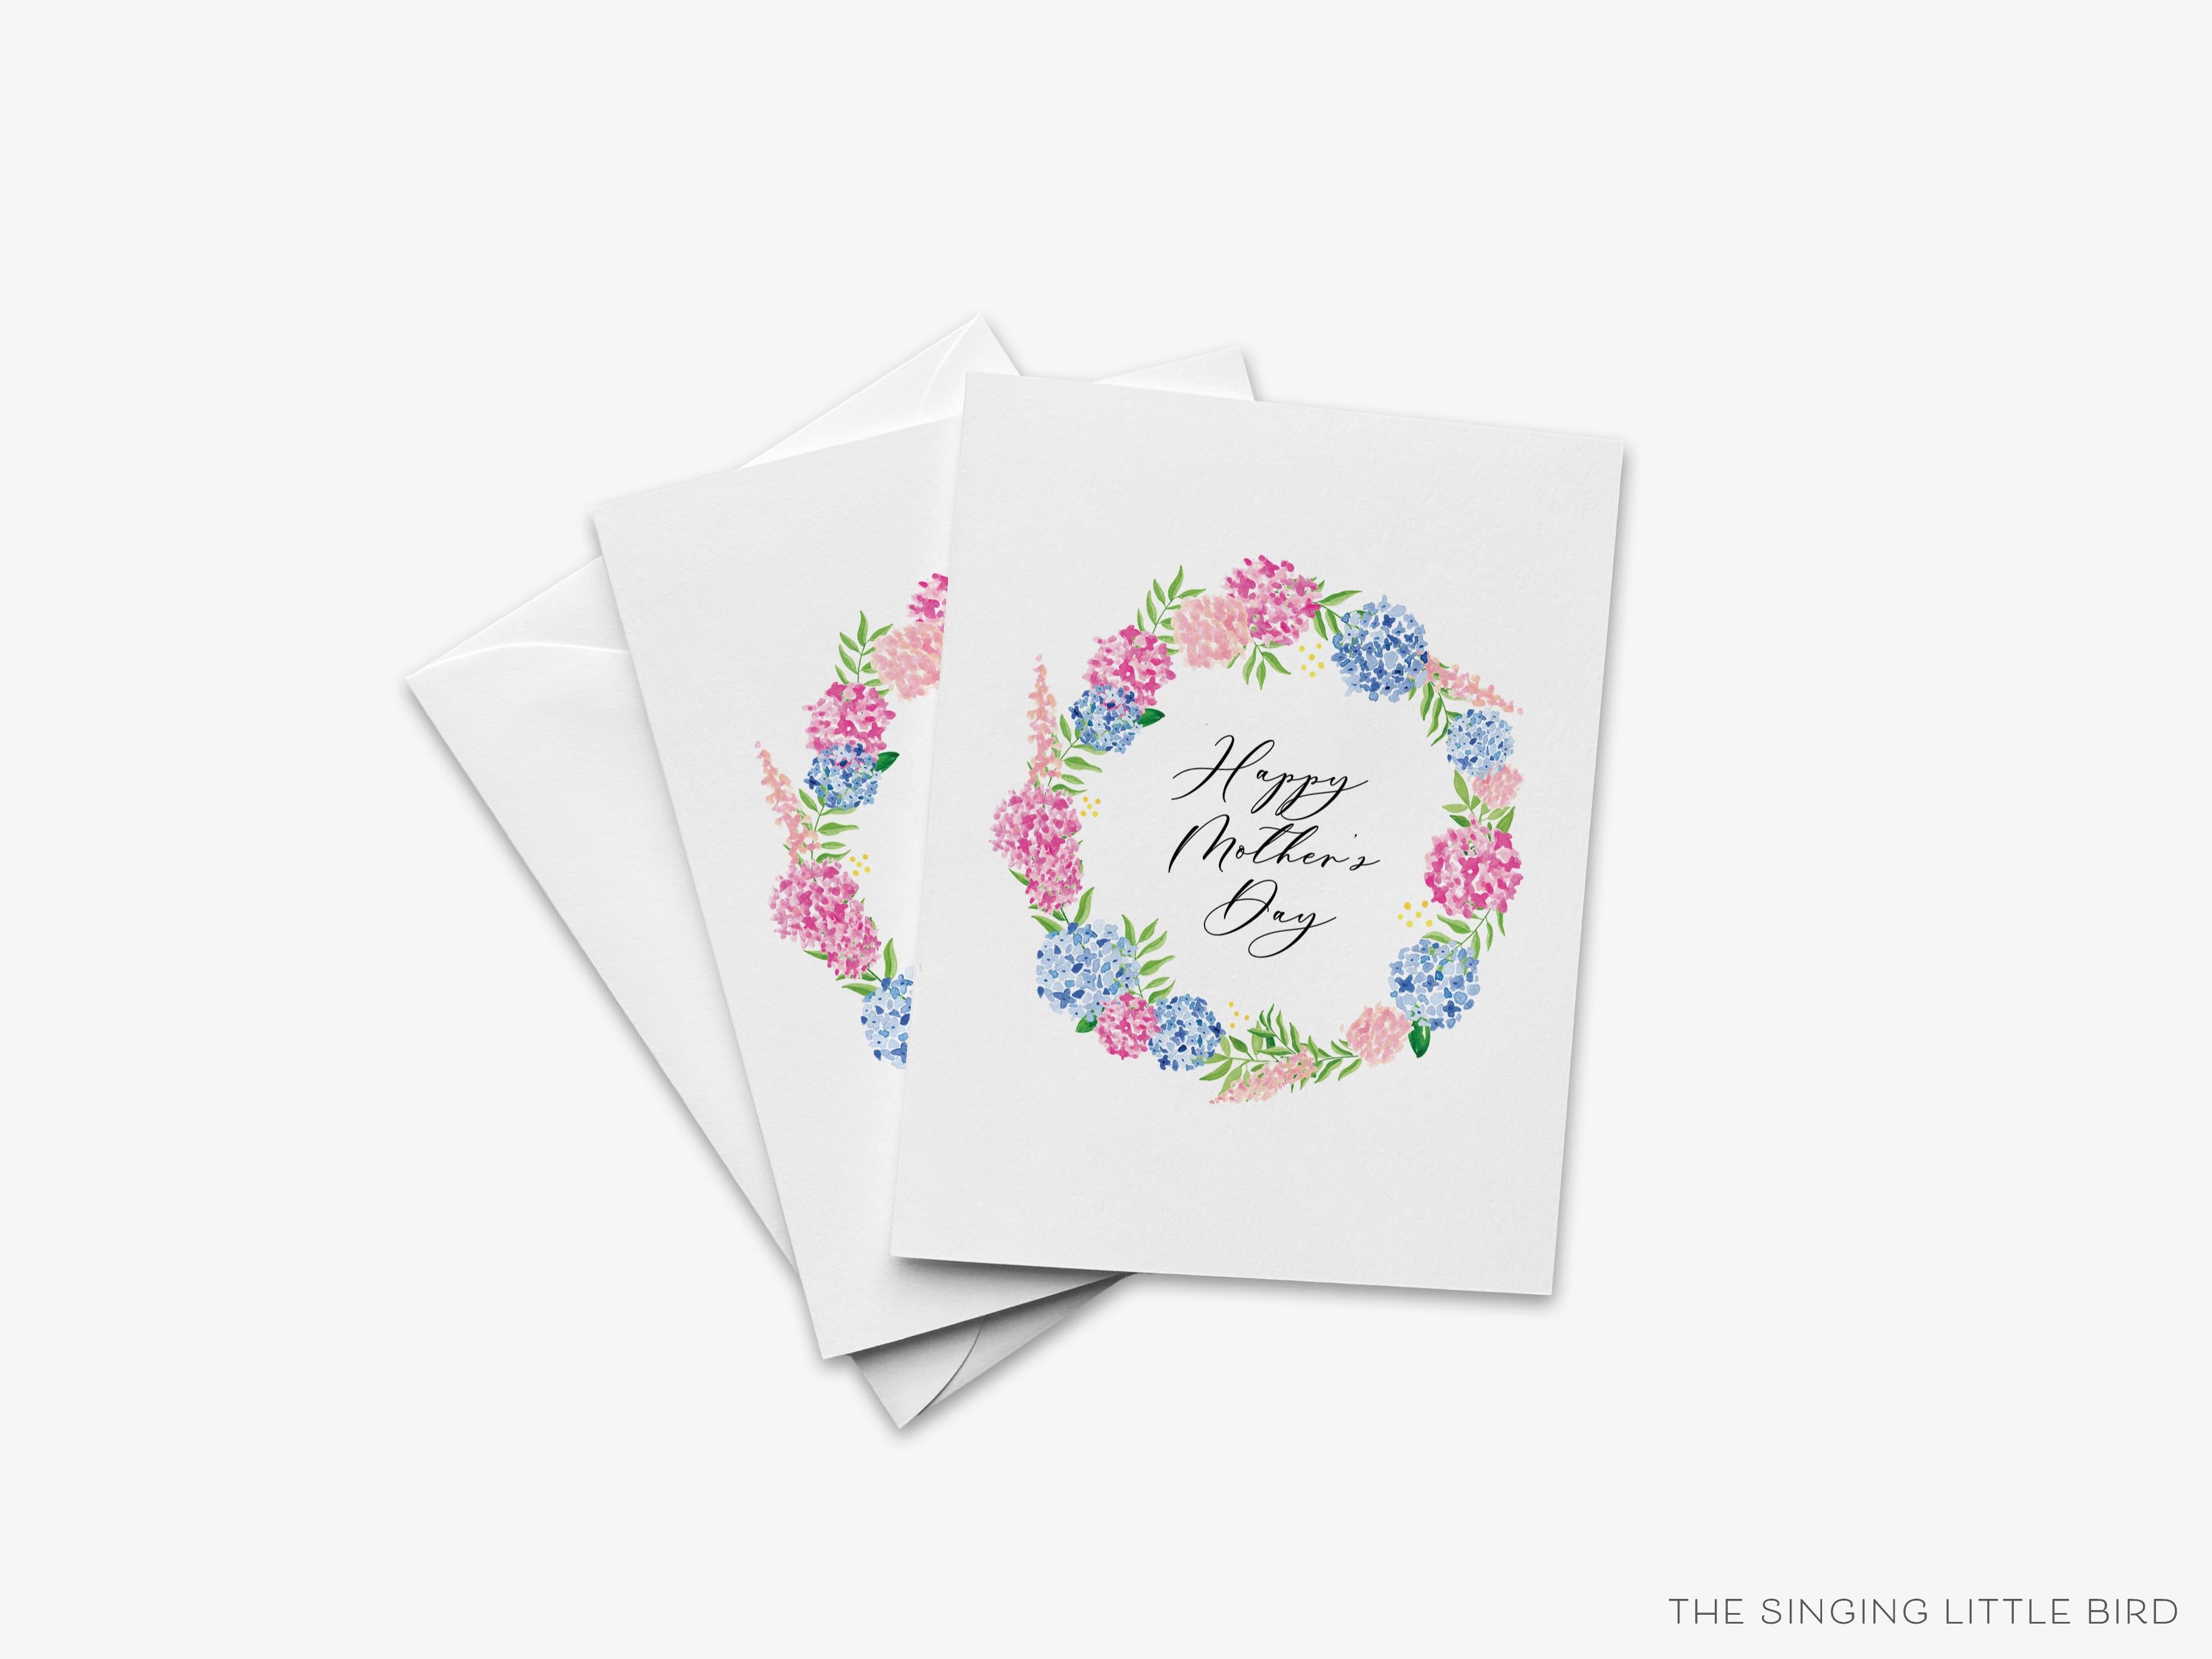 Happy Mother's Day Floral Wreath Greeting Card-These folded greeting cards are 4.25x5.5 and feature our hand-painted floral wreath, printed in the USA on 100lb textured stock. They come with a White envelope and make a great Mother's Day card for the mom in your life.-The Singing Little Bird